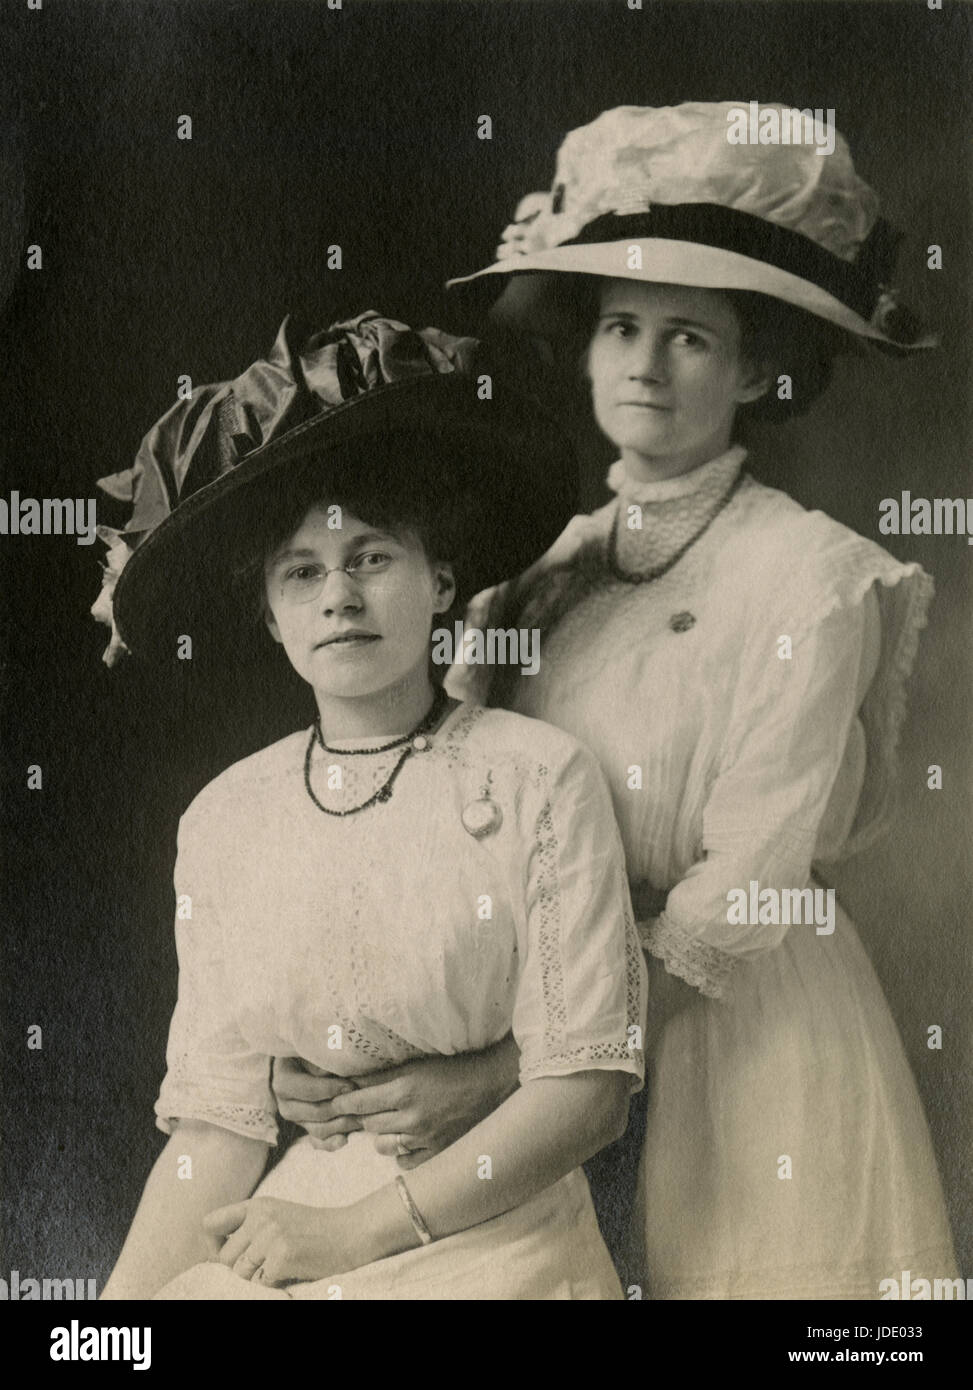 Antique c1910 photograph, mother and daugher in Edwardian clothing. Location is probably Mankato, Minnesota. SOURCE: ORIGINAL PHOTOGRAPH. Stock Photo